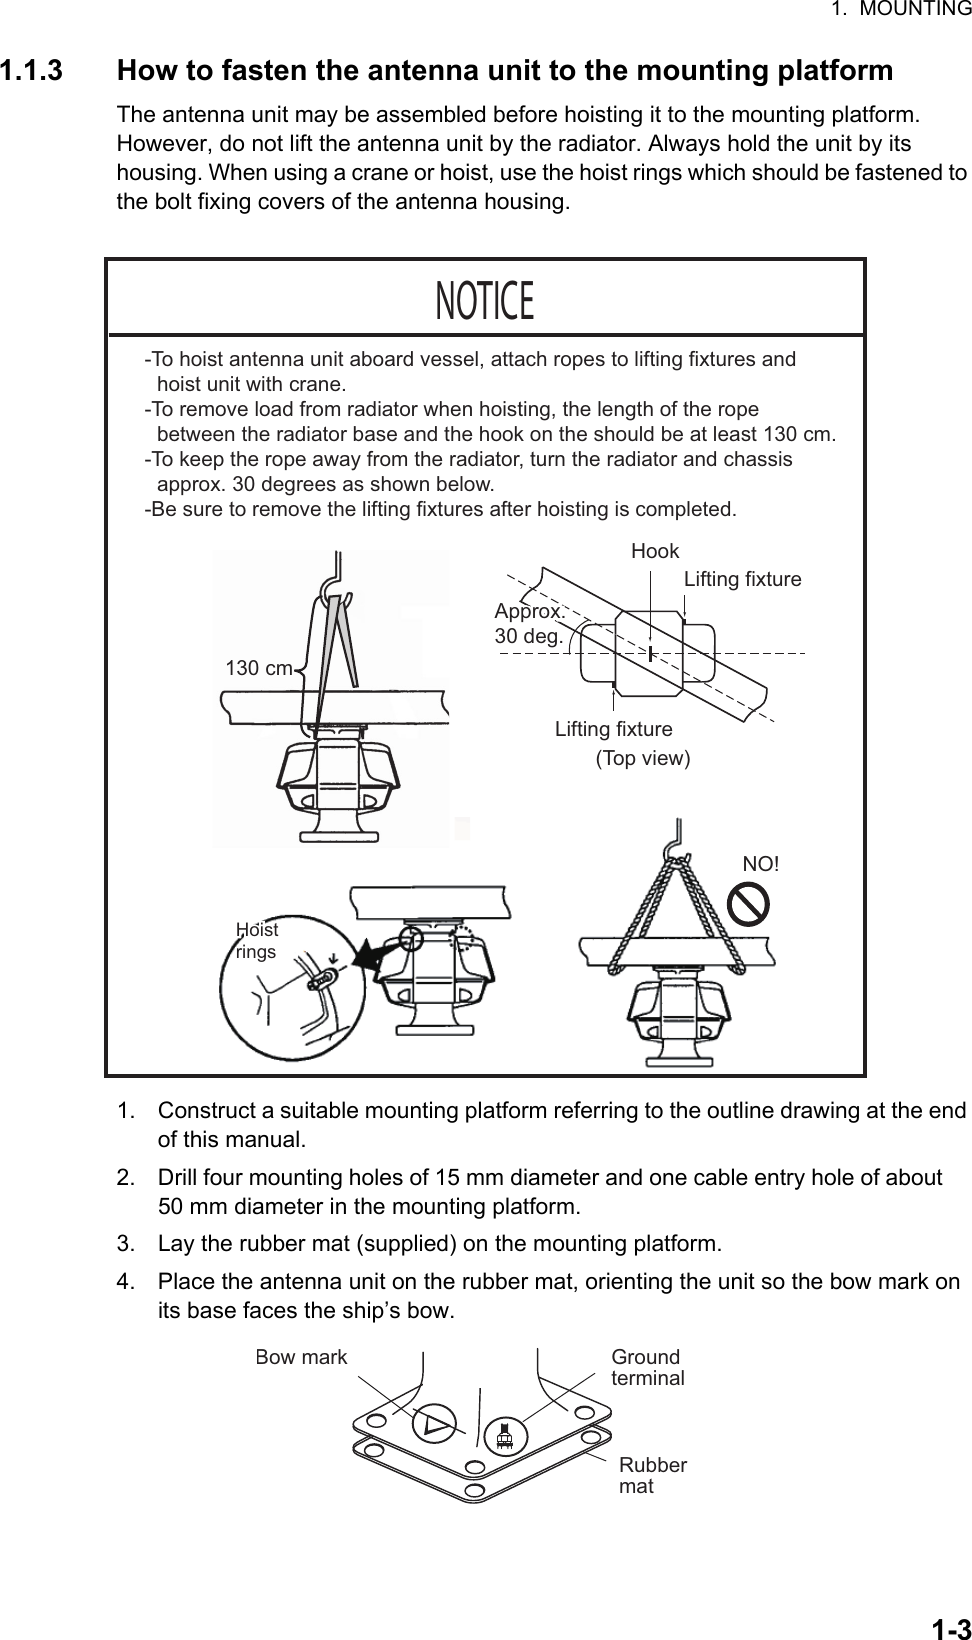 1.  MOUNTING1-31.1.3 How to fasten the antenna unit to the mounting platformThe antenna unit may be assembled before hoisting it to the mounting platform.    However, do not lift the antenna unit by the radiator. Always hold the unit by its      housing. When using a crane or hoist, use the hoist rings which should be fastened to the bolt fixing covers of the antenna housing.1. Construct a suitable mounting platform referring to the outline drawing at the end of this manual.2. Drill four mounting holes of 15 mm diameter and one cable entry hole of about     50 mm diameter in the mounting platform.3. Lay the rubber mat (supplied) on the mounting platform.4. Place the antenna unit on the rubber mat, orienting the unit so the bow mark on its base faces the ship’s bow.-To hoist antenna unit aboard vessel, attach ropes to lifting fixtures and hoist unit with crane.-To remove load from radiator when hoisting, the length of the rope between the radiator base and the hook on the should be at least 130 cm.-To keep the rope away from the radiator, turn the radiator and chassis approx. 30 degrees as shown below.-Be sure to remove the lifting fixtures after hoisting is completed.  130 cmHookLifting fixtureApprox. 30 deg.Approx. 30 deg.Lifting fixture(Top view)Hoist ringsHoist ringsNO!NOTICEGroundterminalRubbermatBow mark